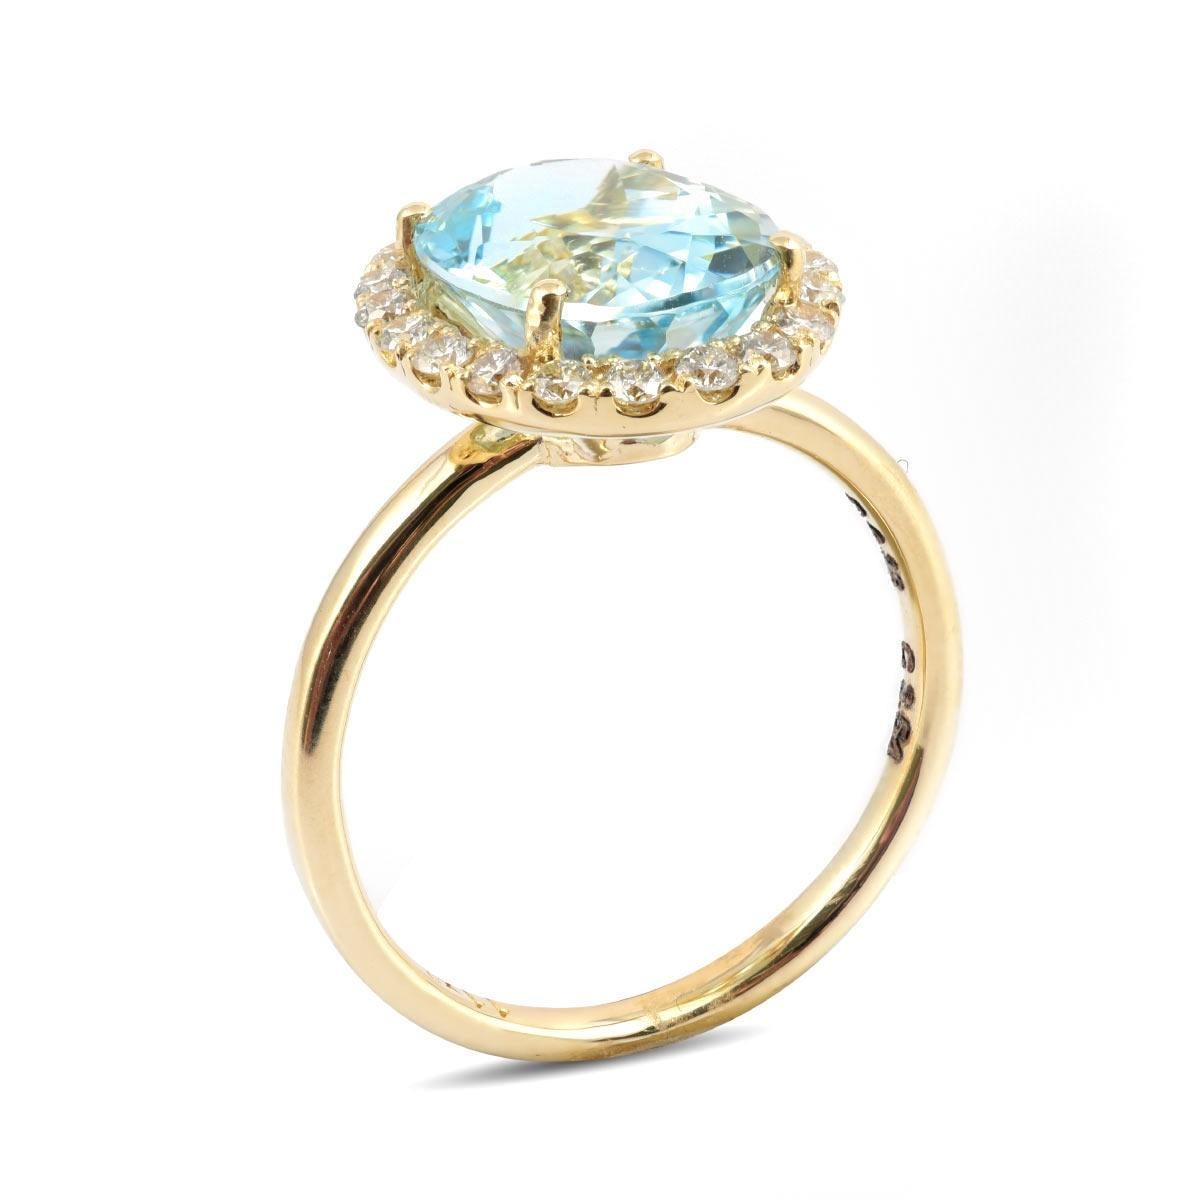 This ring is the epitome of elegance, featuring a 3.54 carat Aquamarine with its soothing and beautiful cool blue tones. Set in 14K yellow gold, the gemstone's soft colors come to life, and the design places all the emphasis on its exquisite beauty.